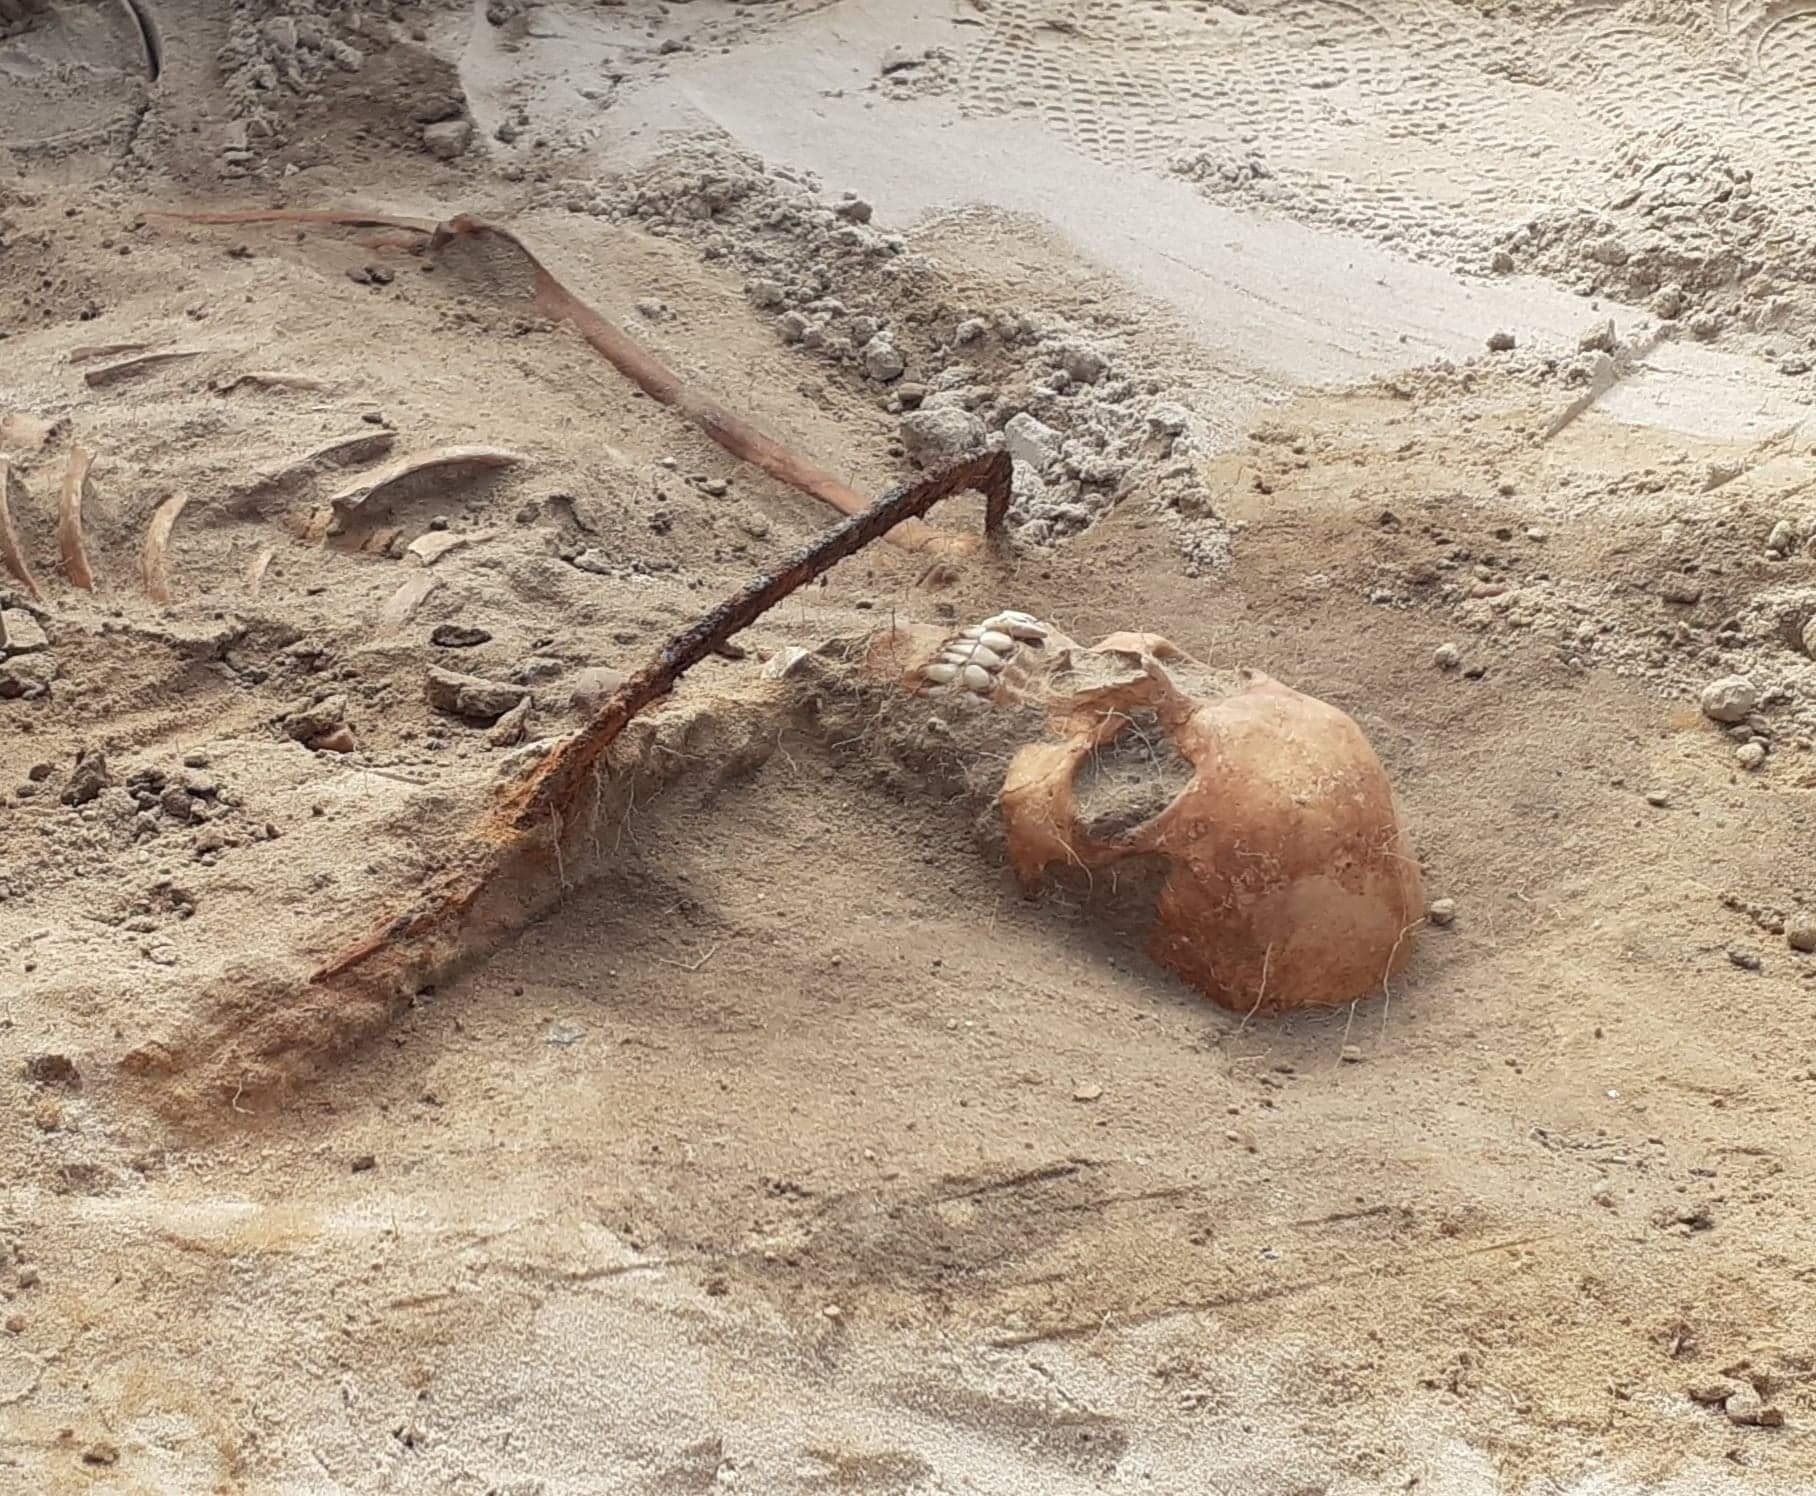 “Vampire” woman buried with sickle over her neck